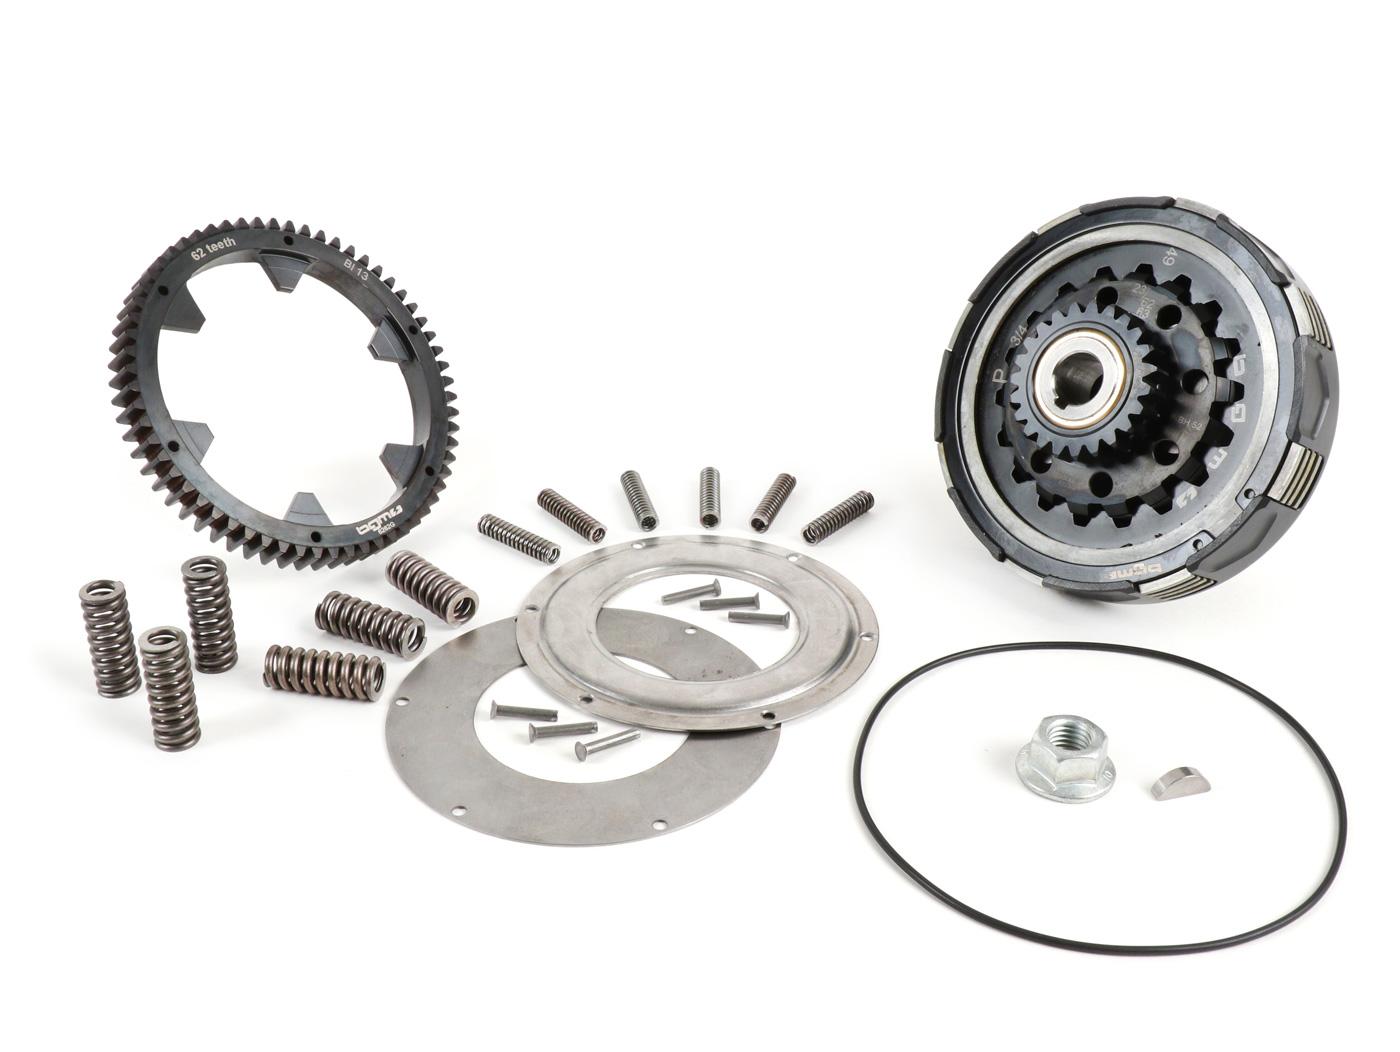 Clutch kit incl. primary transmission pair 23 63 -BGM Pro Superstrong 2.0 CR80 Ultralube, type Cosa2/FL- BGM Pro elastic gear 62 teeth (straight) - Vespa PX80, PX125, PX150, PX200, Cosa, T5, Sprint150 Veloce, Rally, GTR, TS125, Super150 (VBC) -